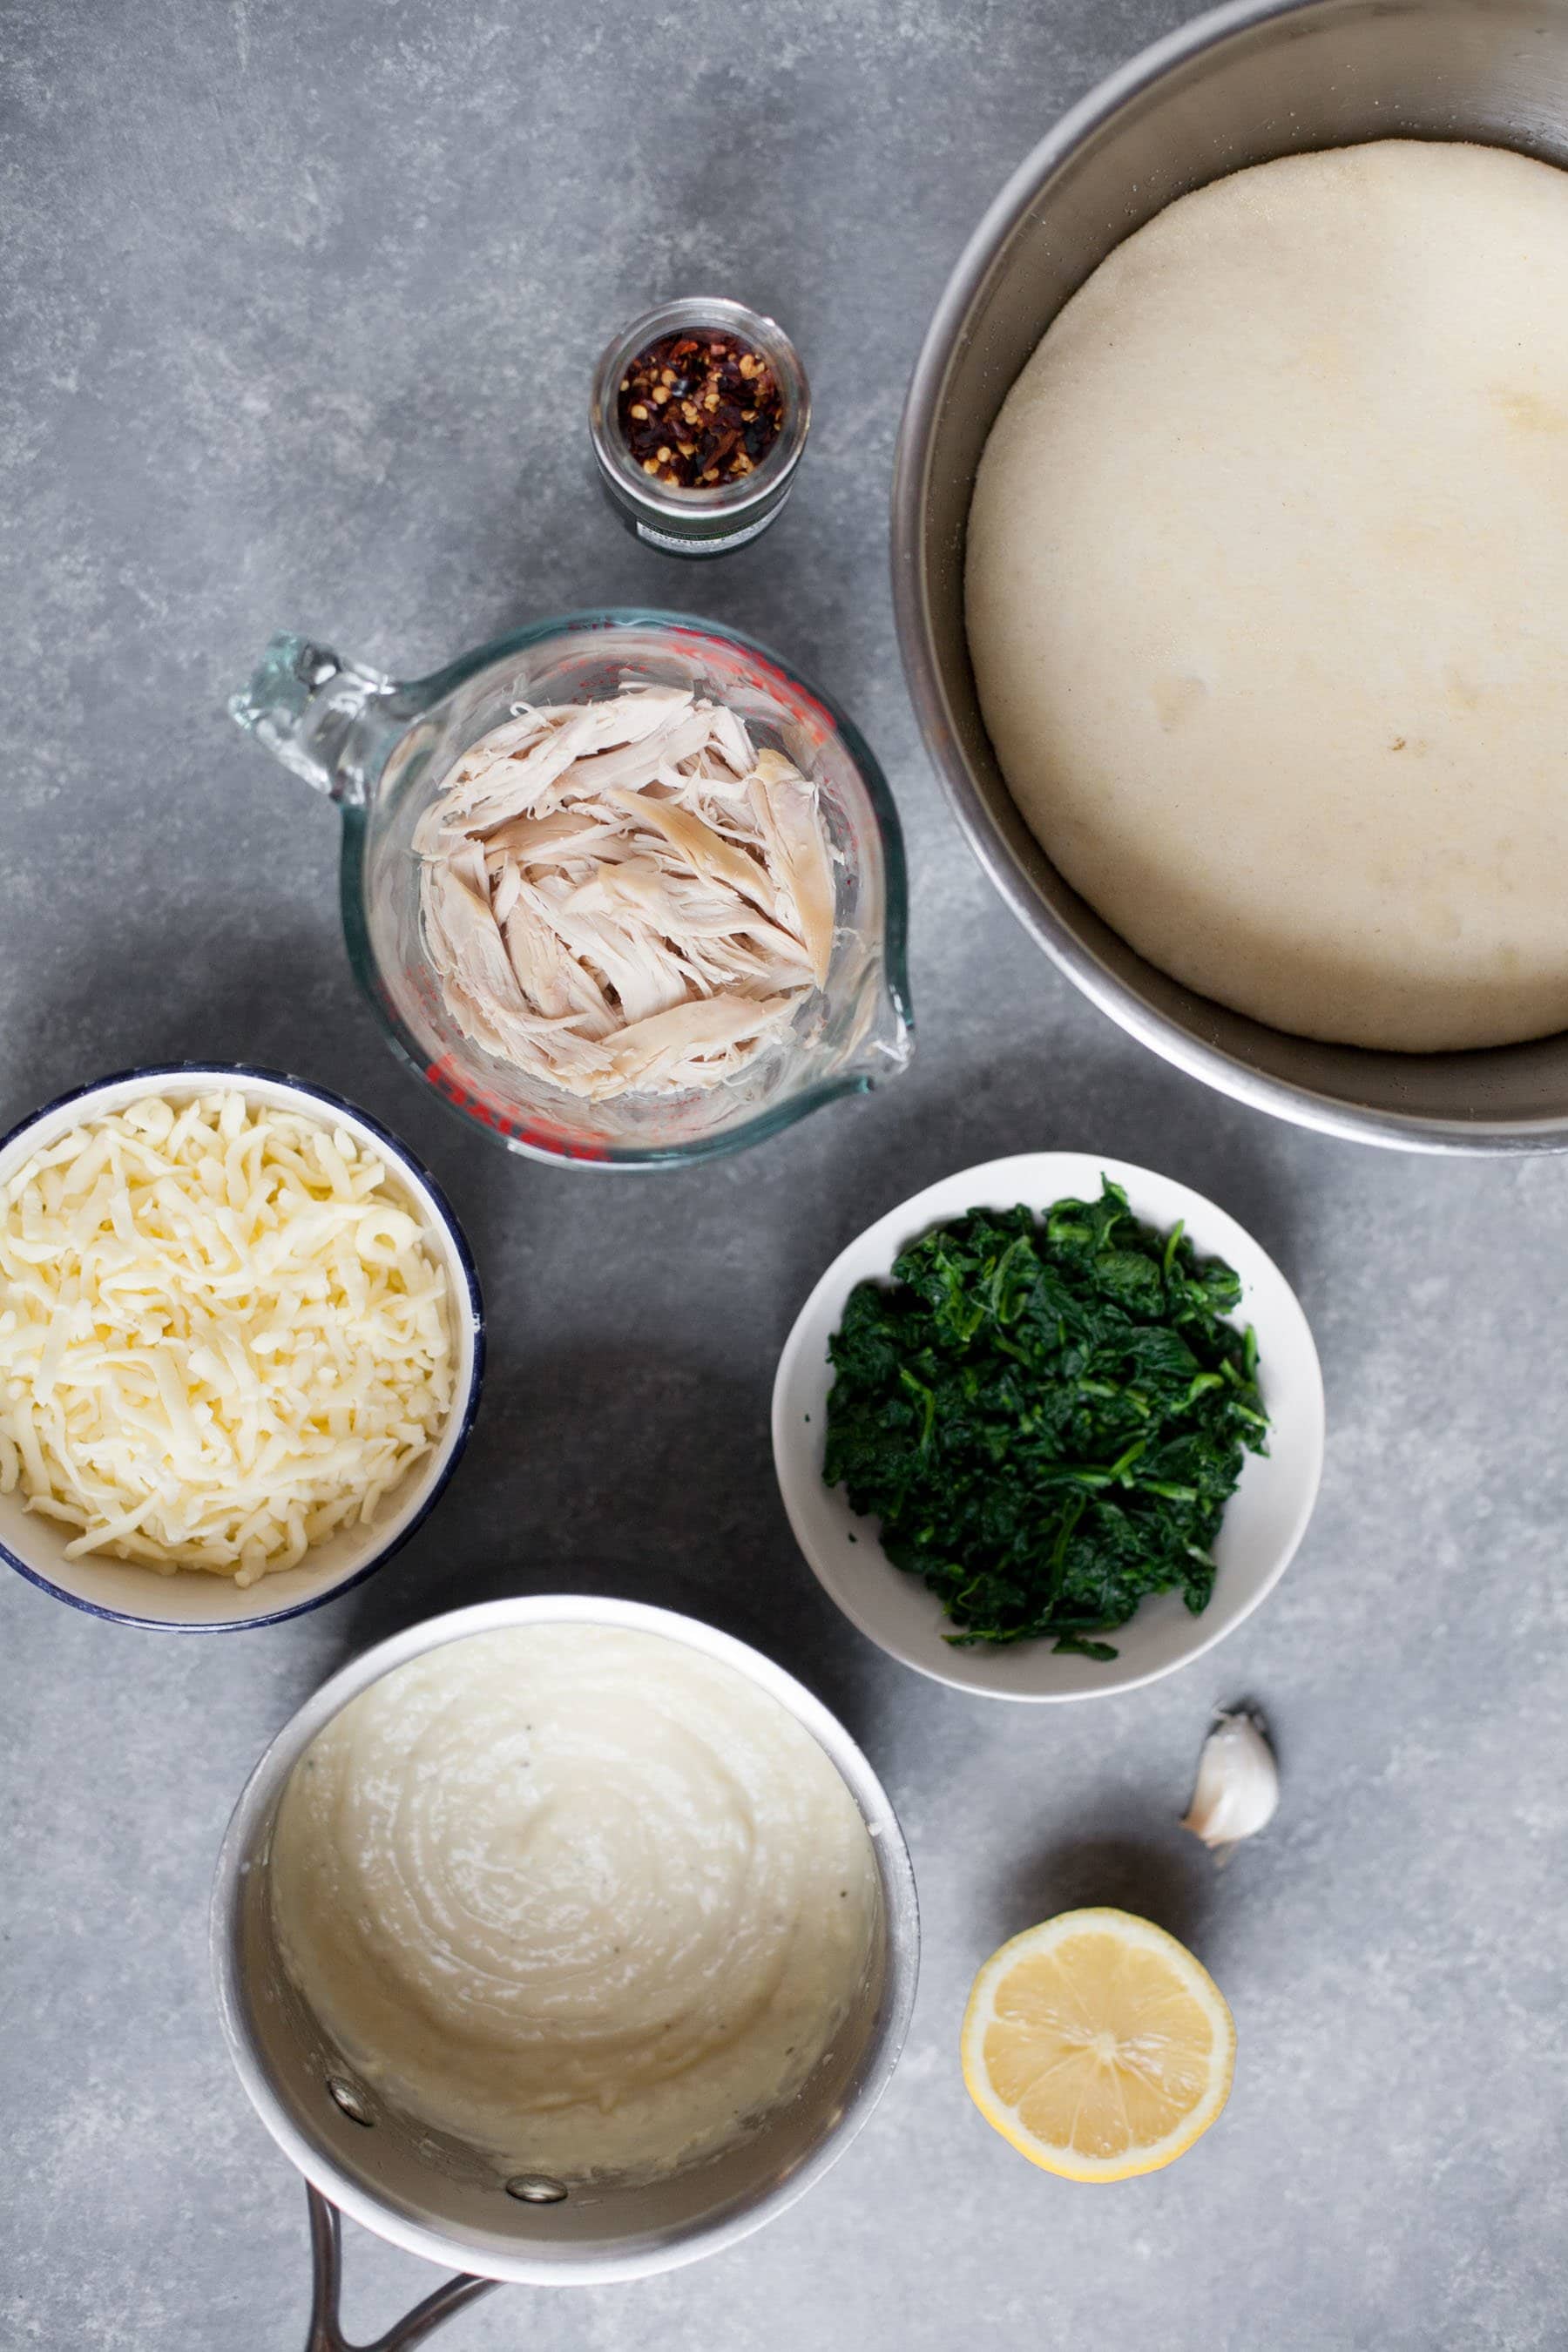 Pizza ingredients sit in bowls together - chicken, spinach, alfredo sauce, cheese, pizza dough